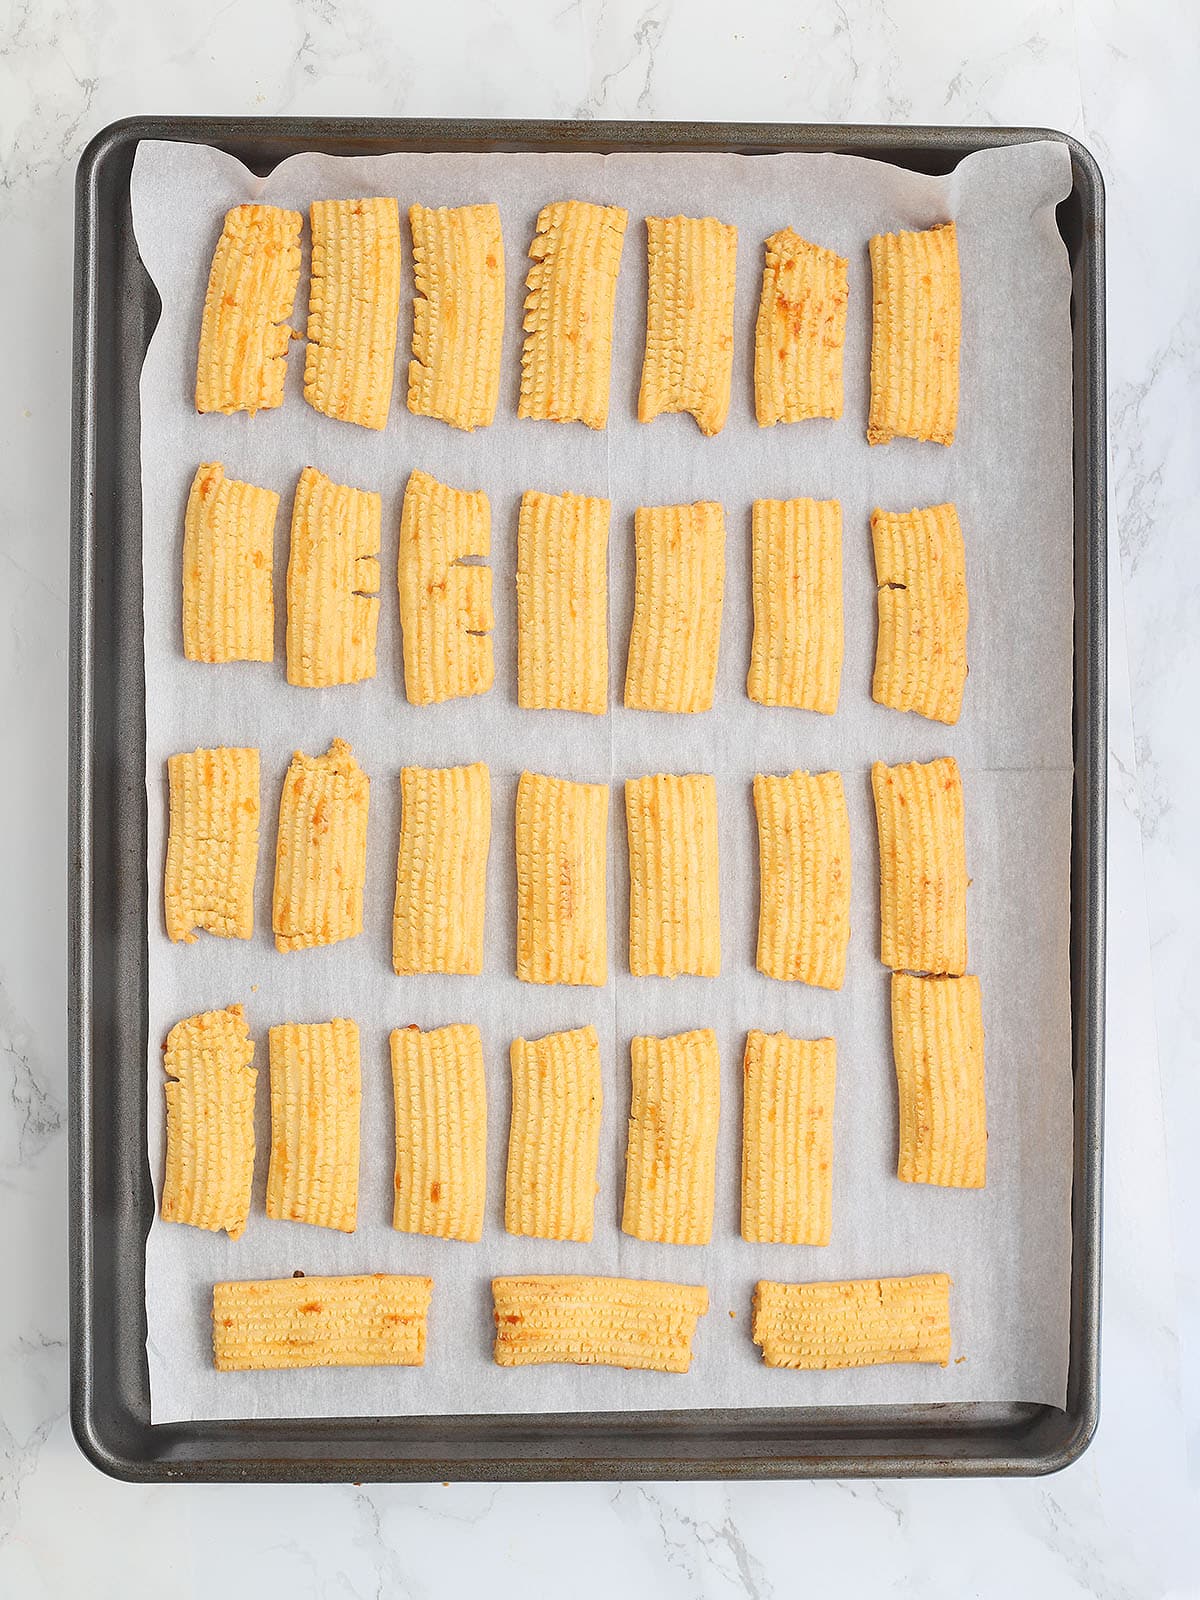 baked cheese straws cooling on a baking sheet